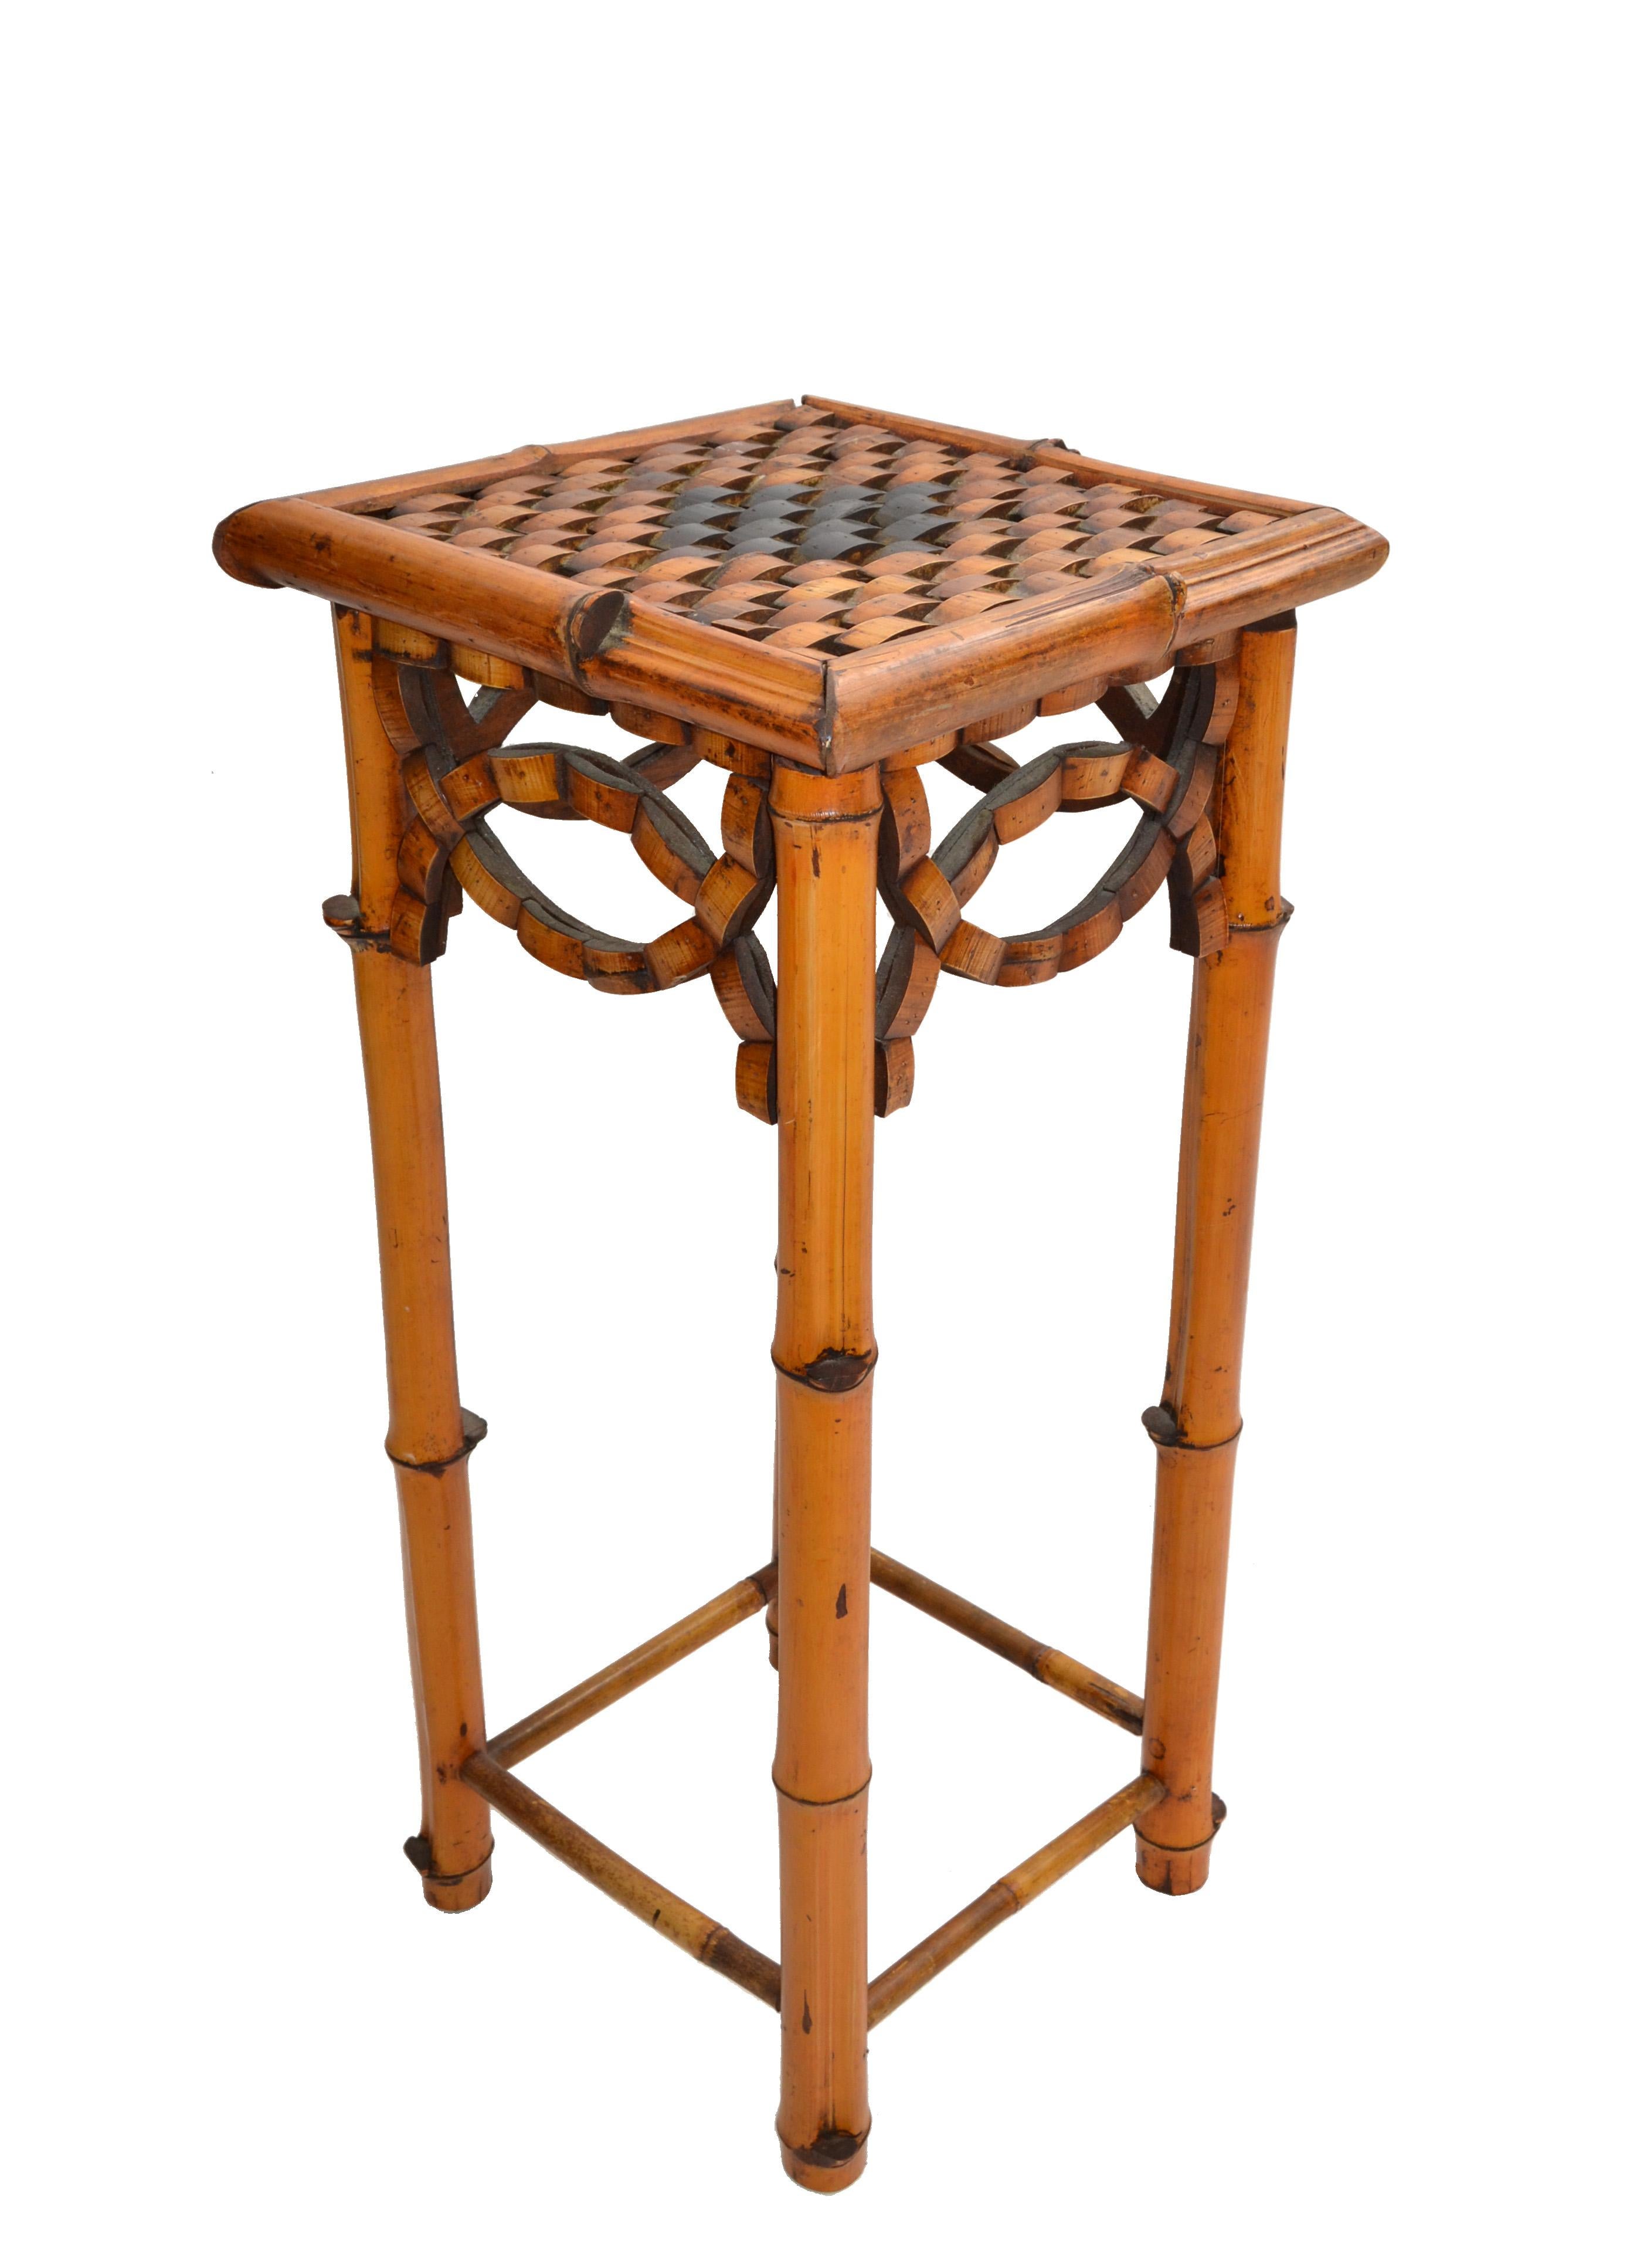 Square decorative handcrafted and handwoven Bohemian Style Mid-Century Modern bamboo and rattan side table and plant stand.
Great for your Florida style sunroom or porch.